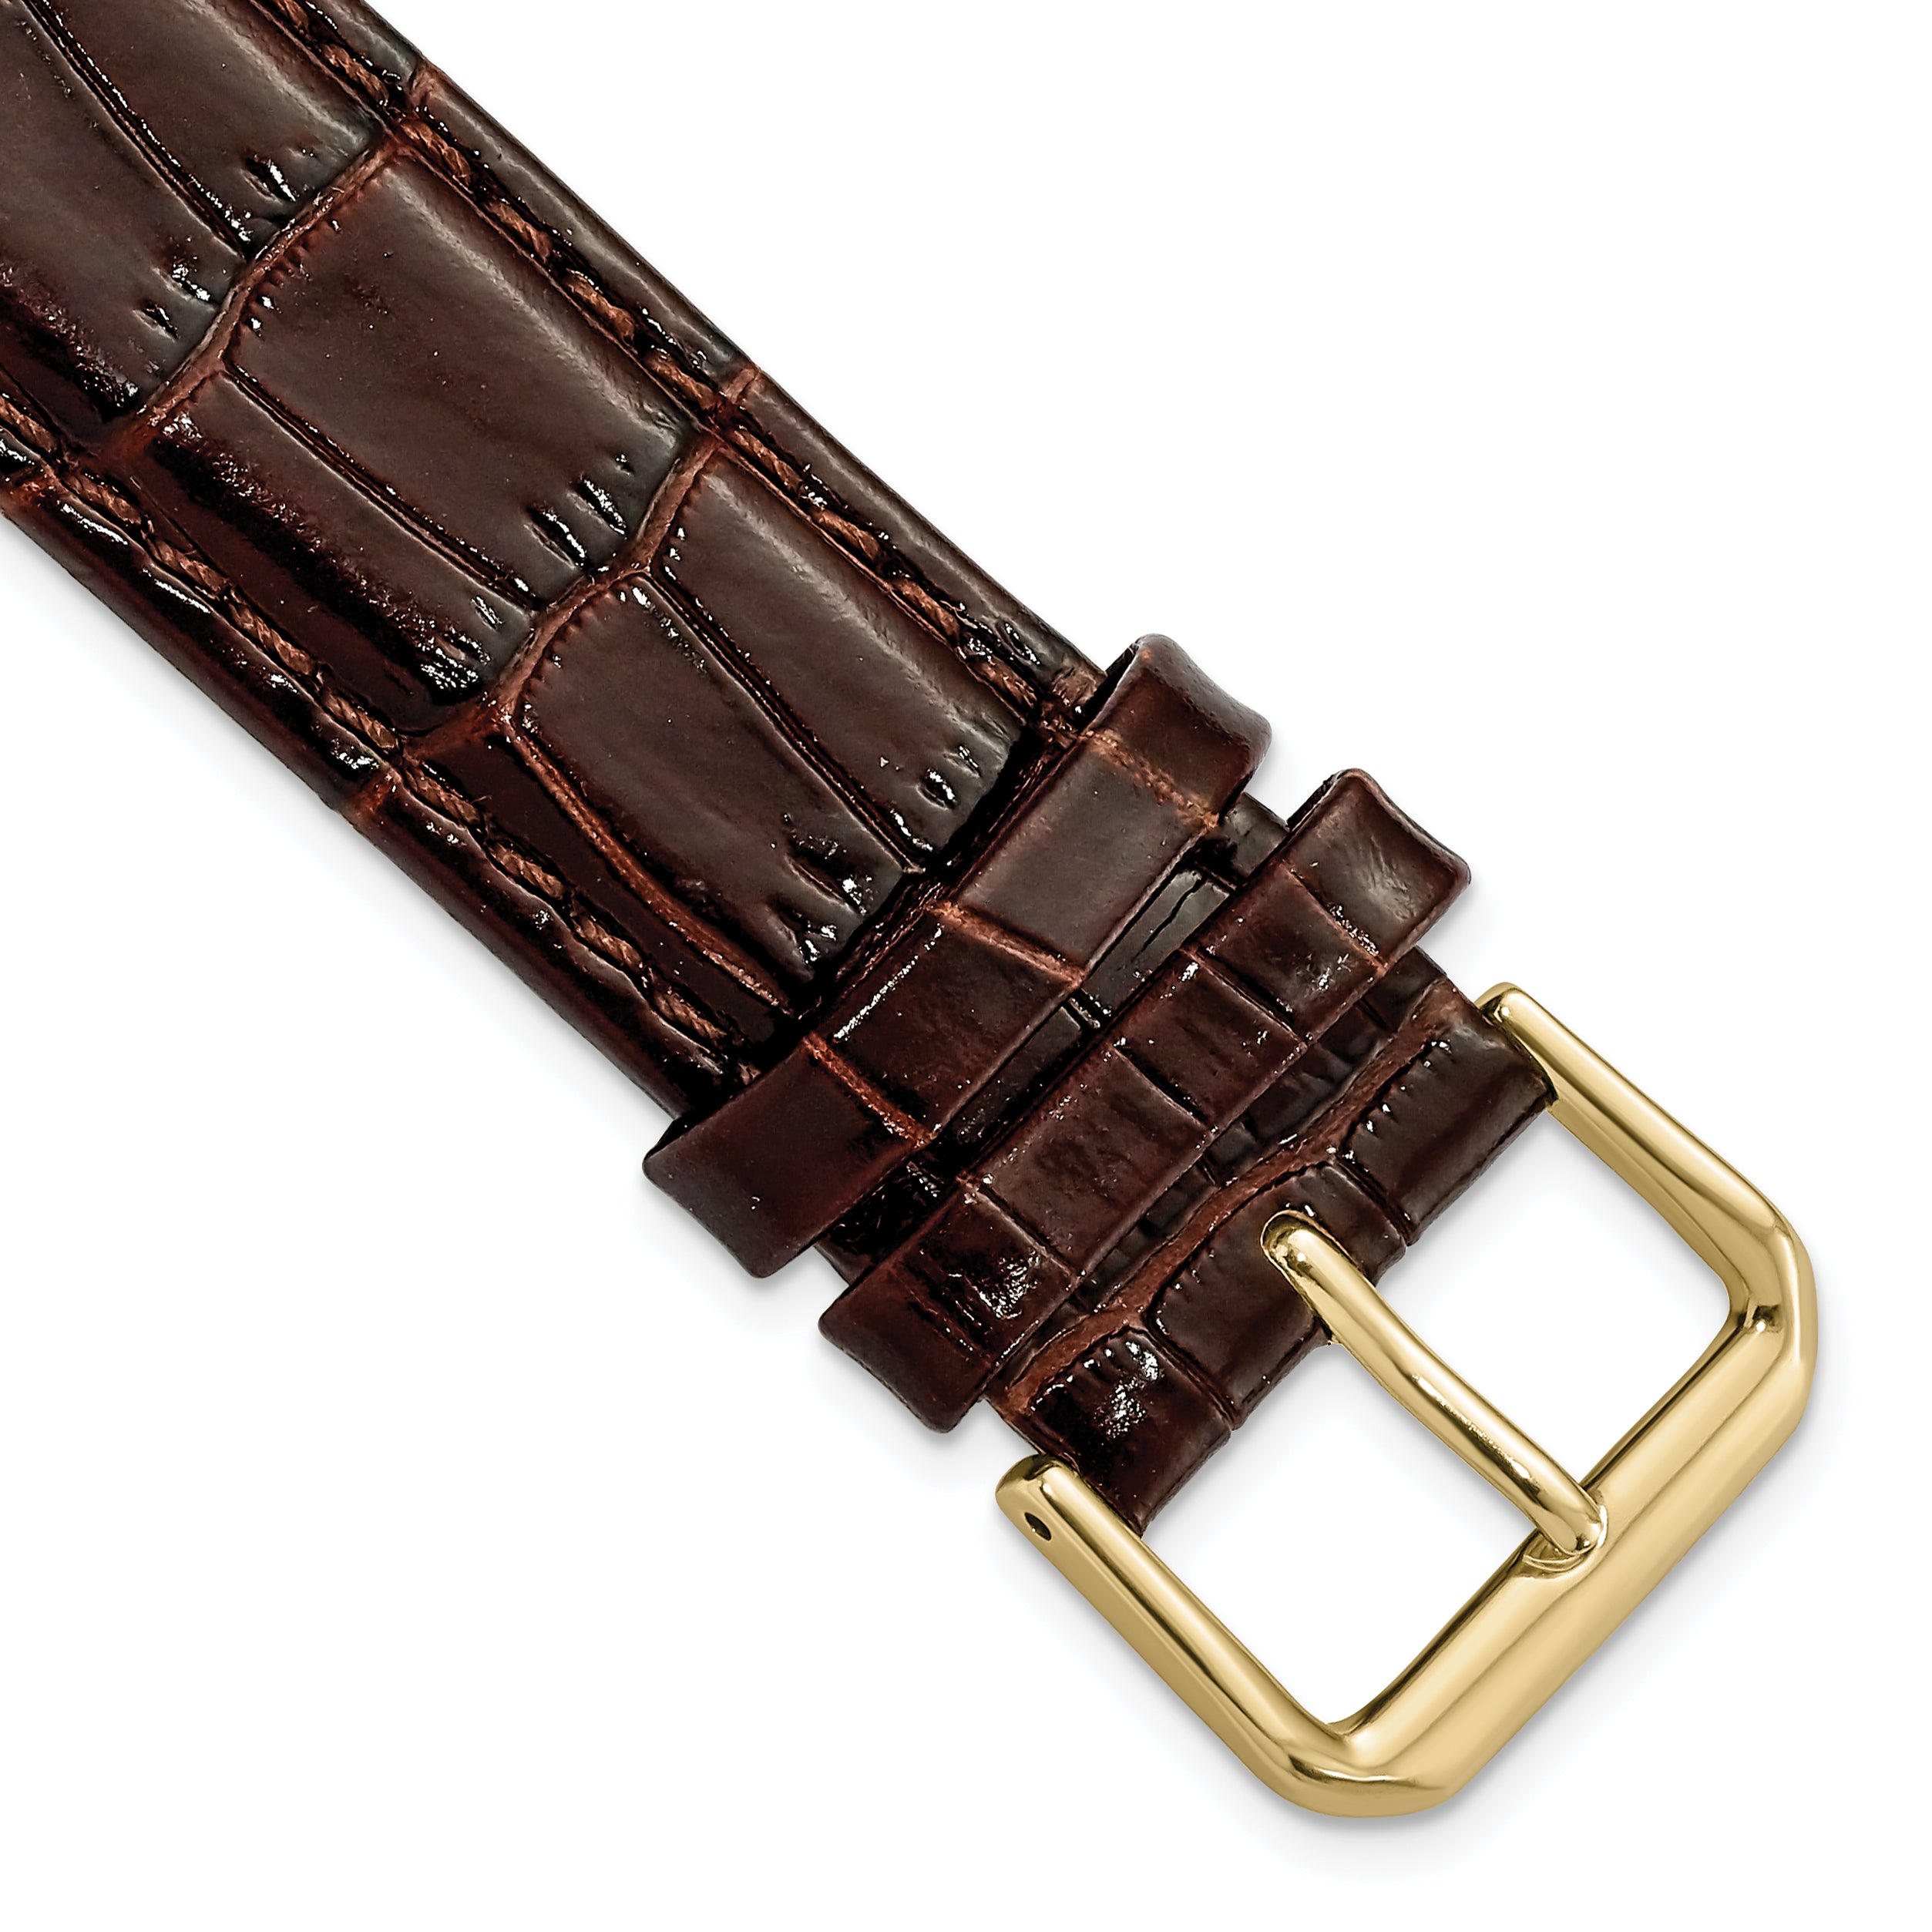 DeBeer 19mm Brown Crocodile Grain Leather with Dark Stitching and Gold-tone Buckle 7.5 inch Watch Band